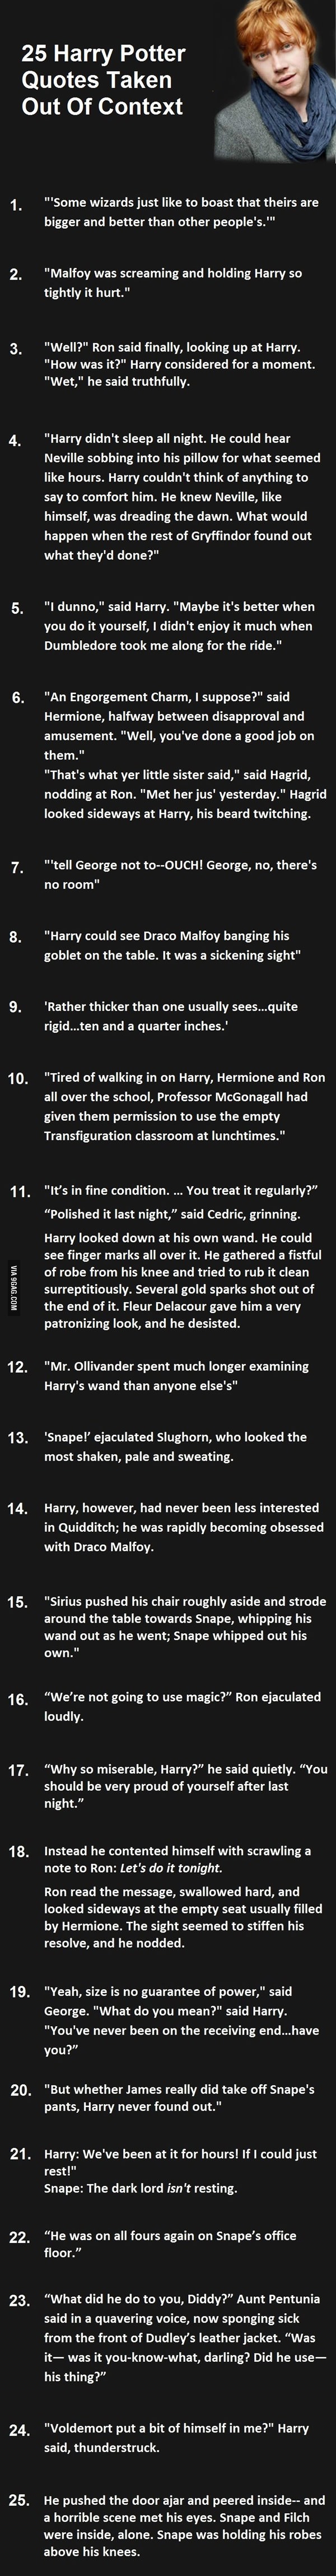 Harry Potter Quotes Taken Out Of Context